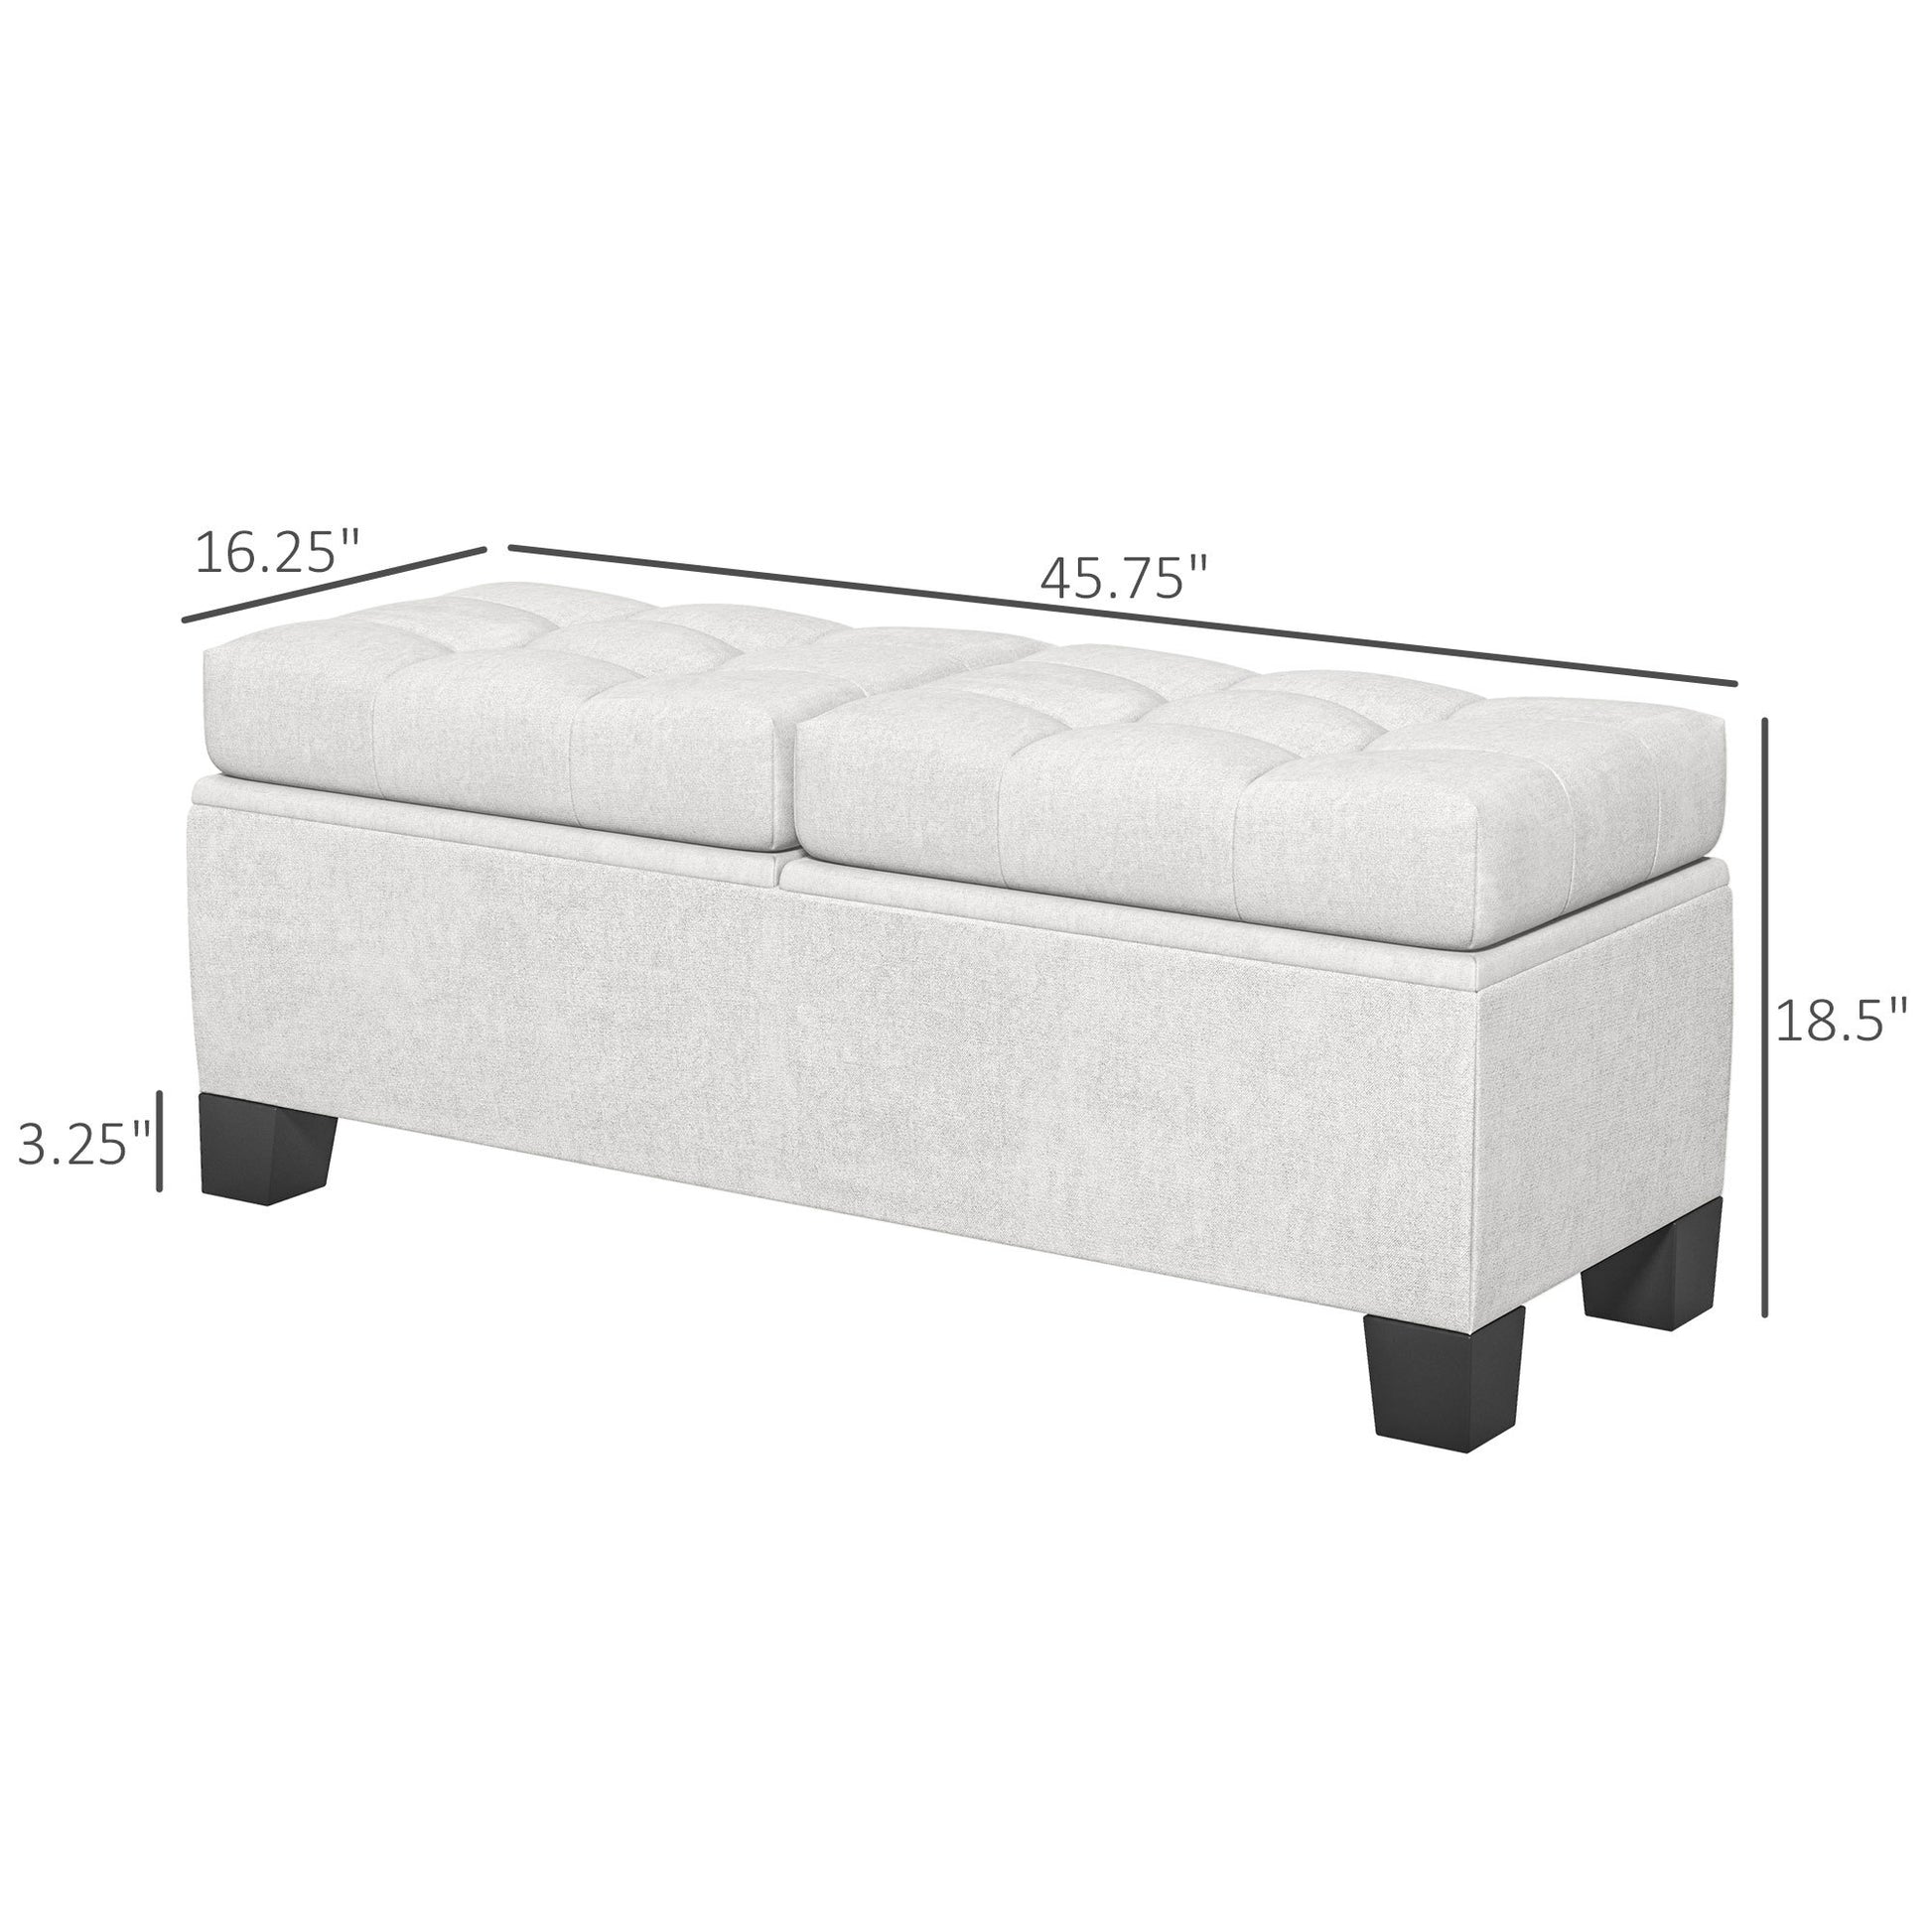 46" Storage Ottoman Bench, Upholstered End of Bed cream white-foam